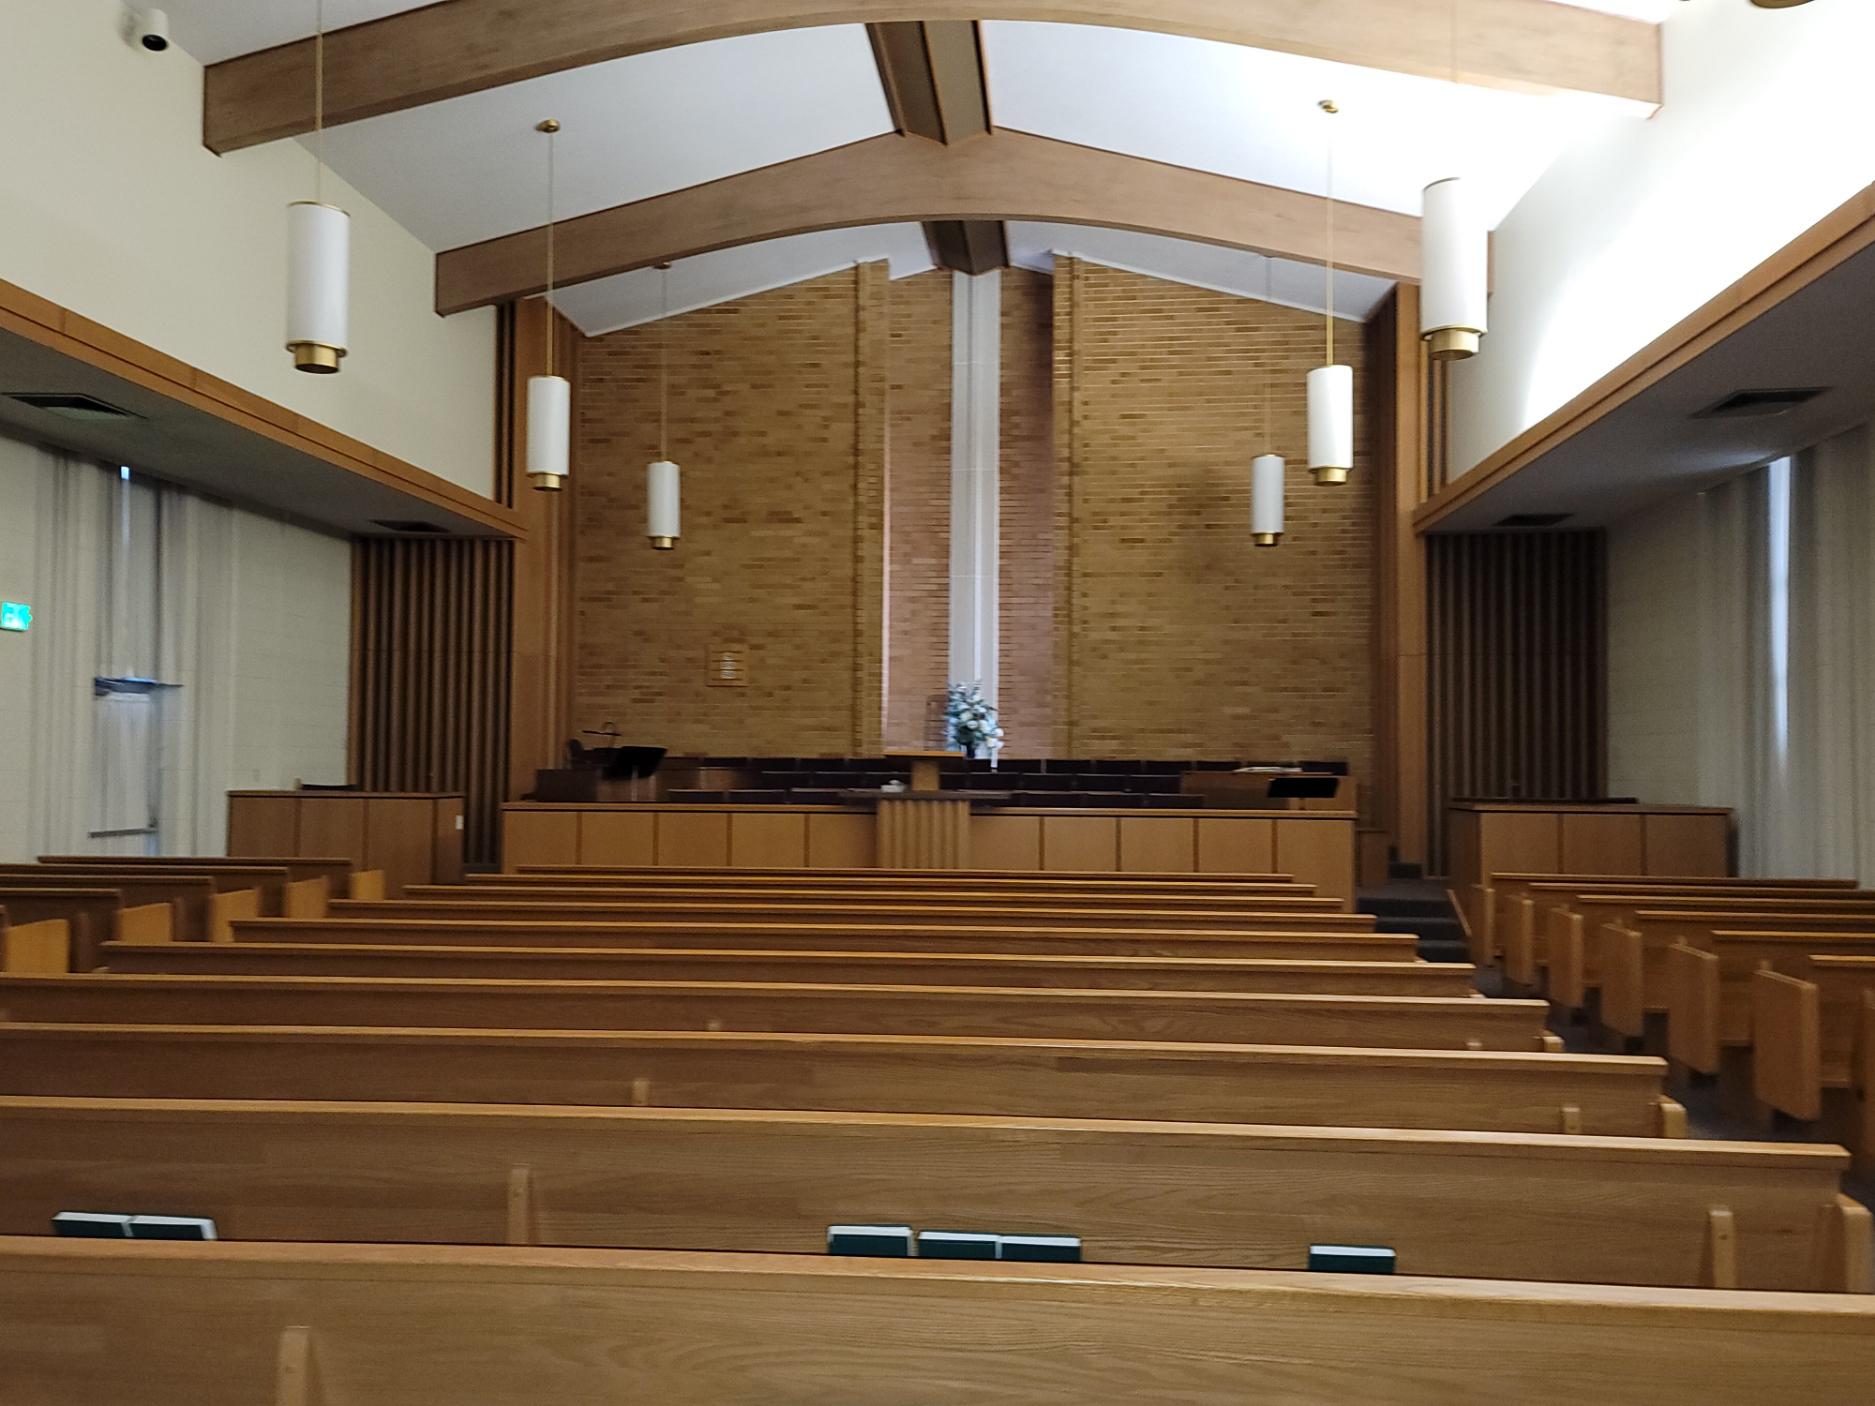 Chapel, or main meeting room, of The Church of Jesus Christ of Latter-day Saints